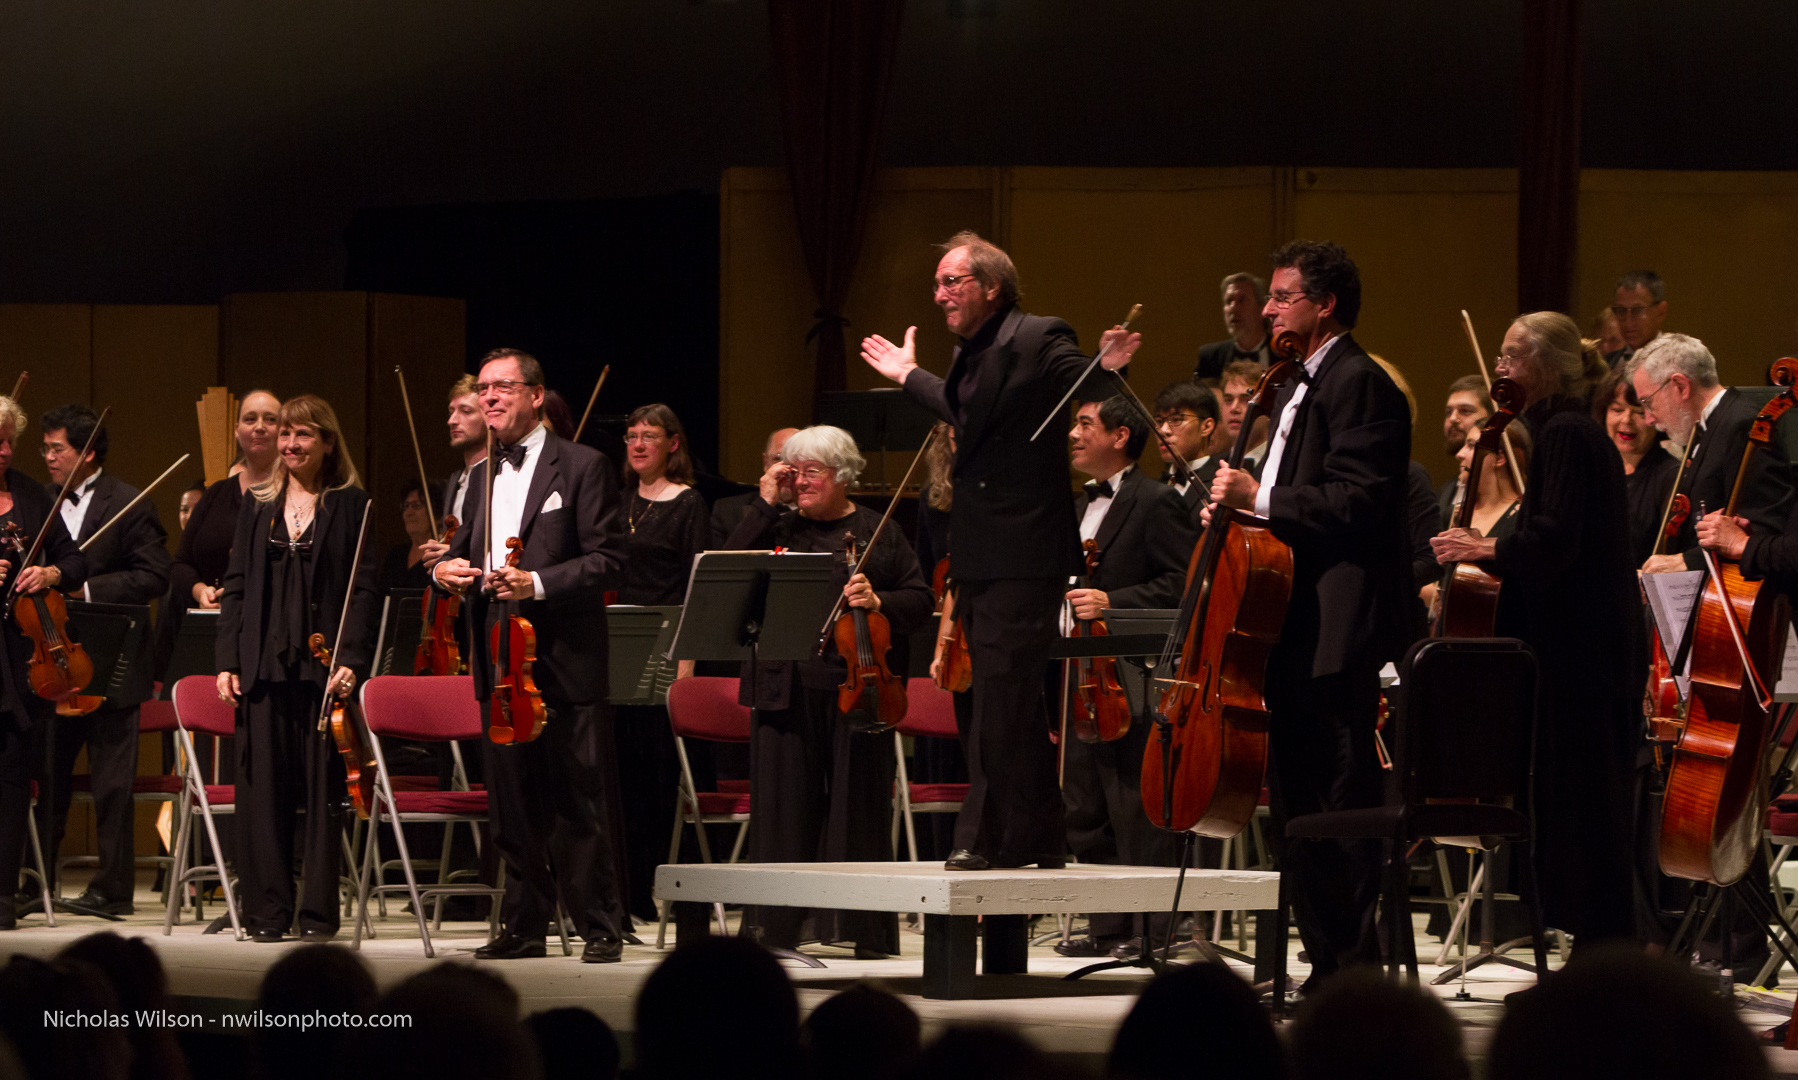 Maestro Allan Pollack and the Festival Orchestra stand to acknowledge applause during the opening concert.